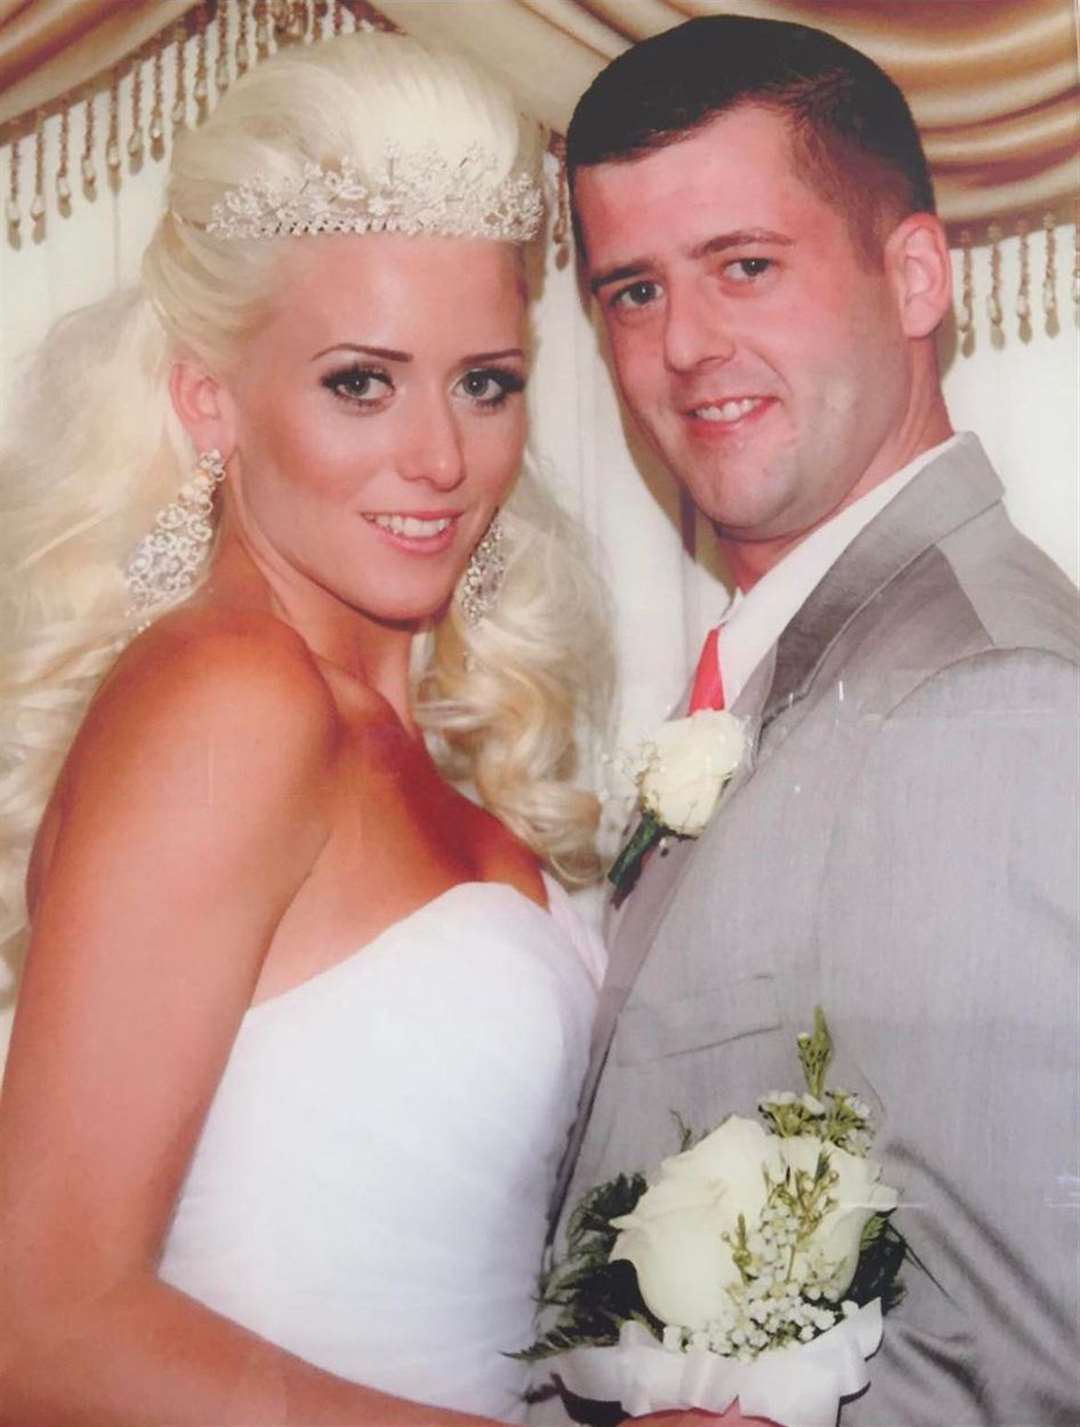 Craig and Laura were married in Las Vegas by an Elvis impersonator